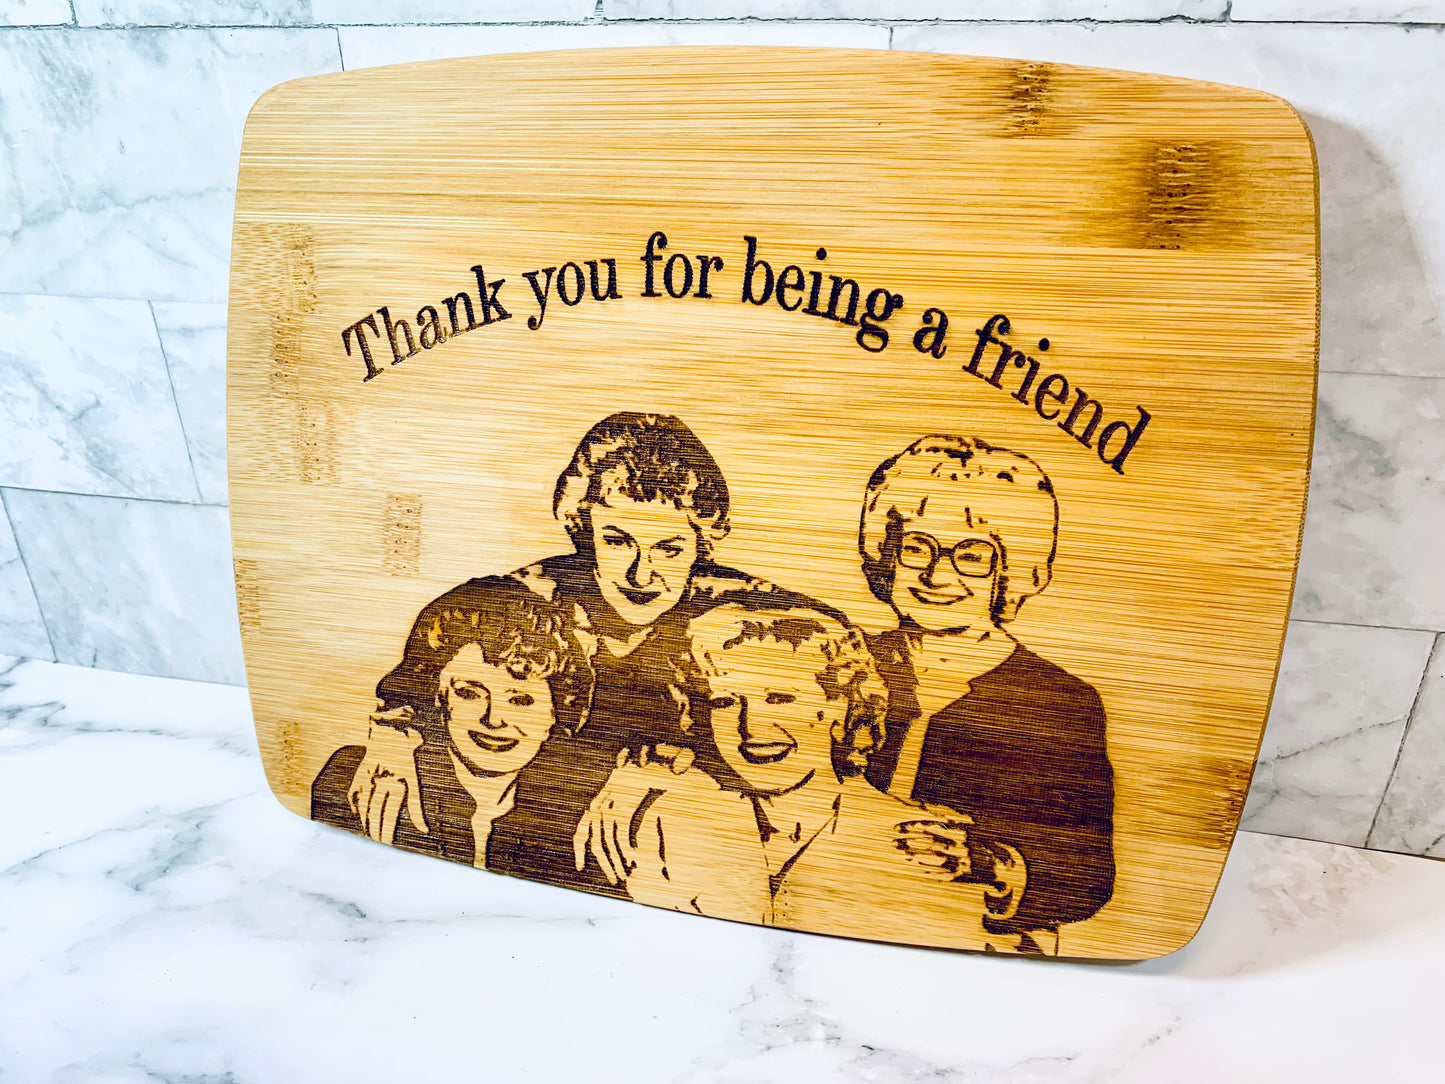 Golden Girls Thank You For Being A Friend Cutting Board - MixMatched Creations